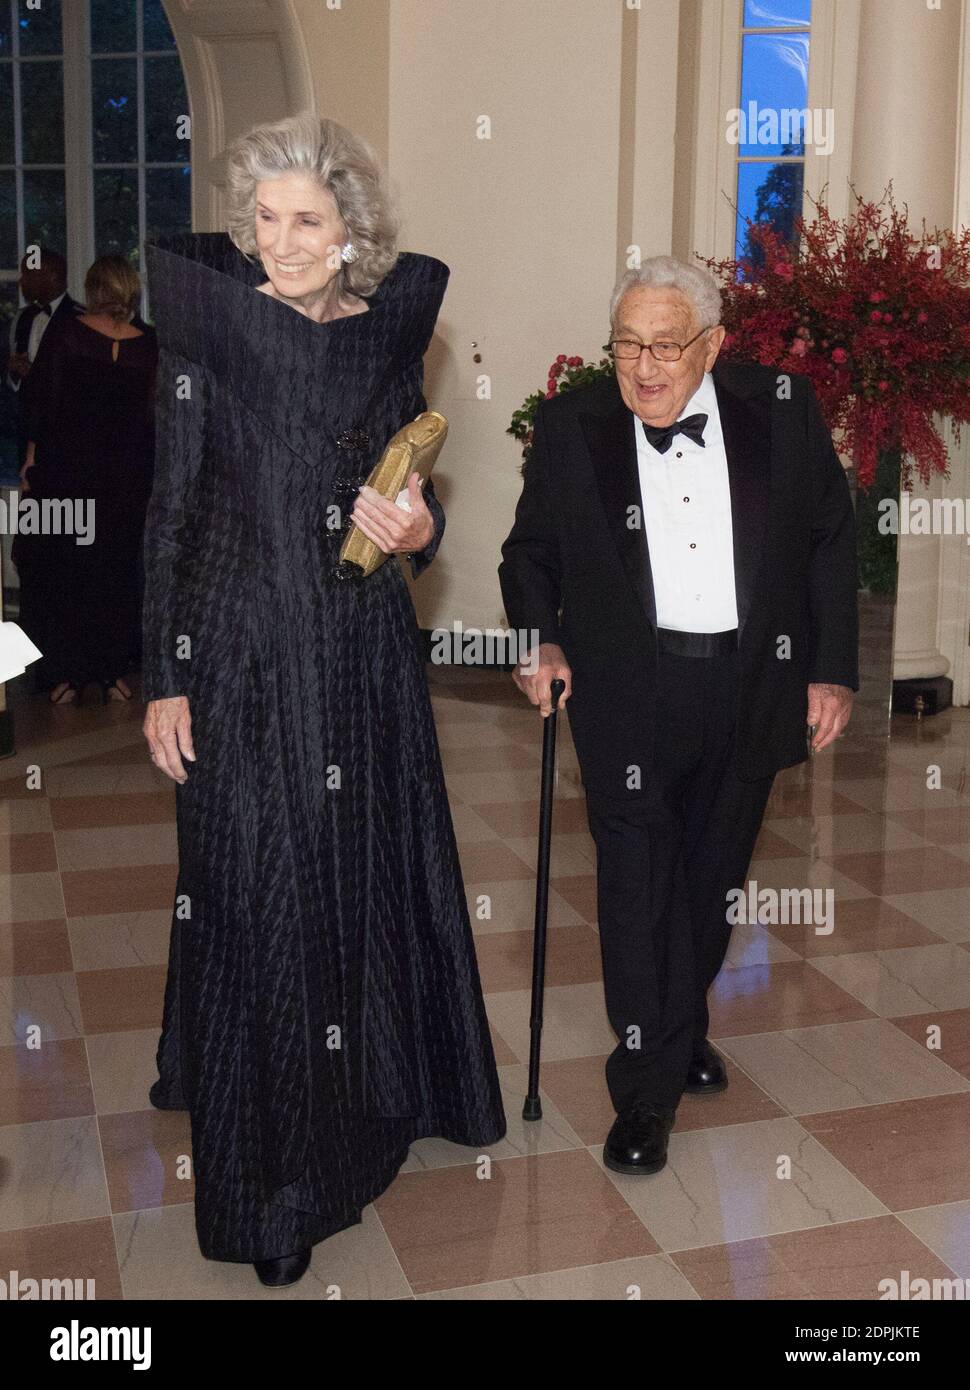 Nancy and Henry Kissinger arrive at the State Dinner for China's President President Xi and Madame Peng Liyuan at the White House in Washington, DC for an official State Visit Friday, September 25, 2015. Photo by Chris Kleponis / Pool/ABACAPRESS.COM Stock Photo